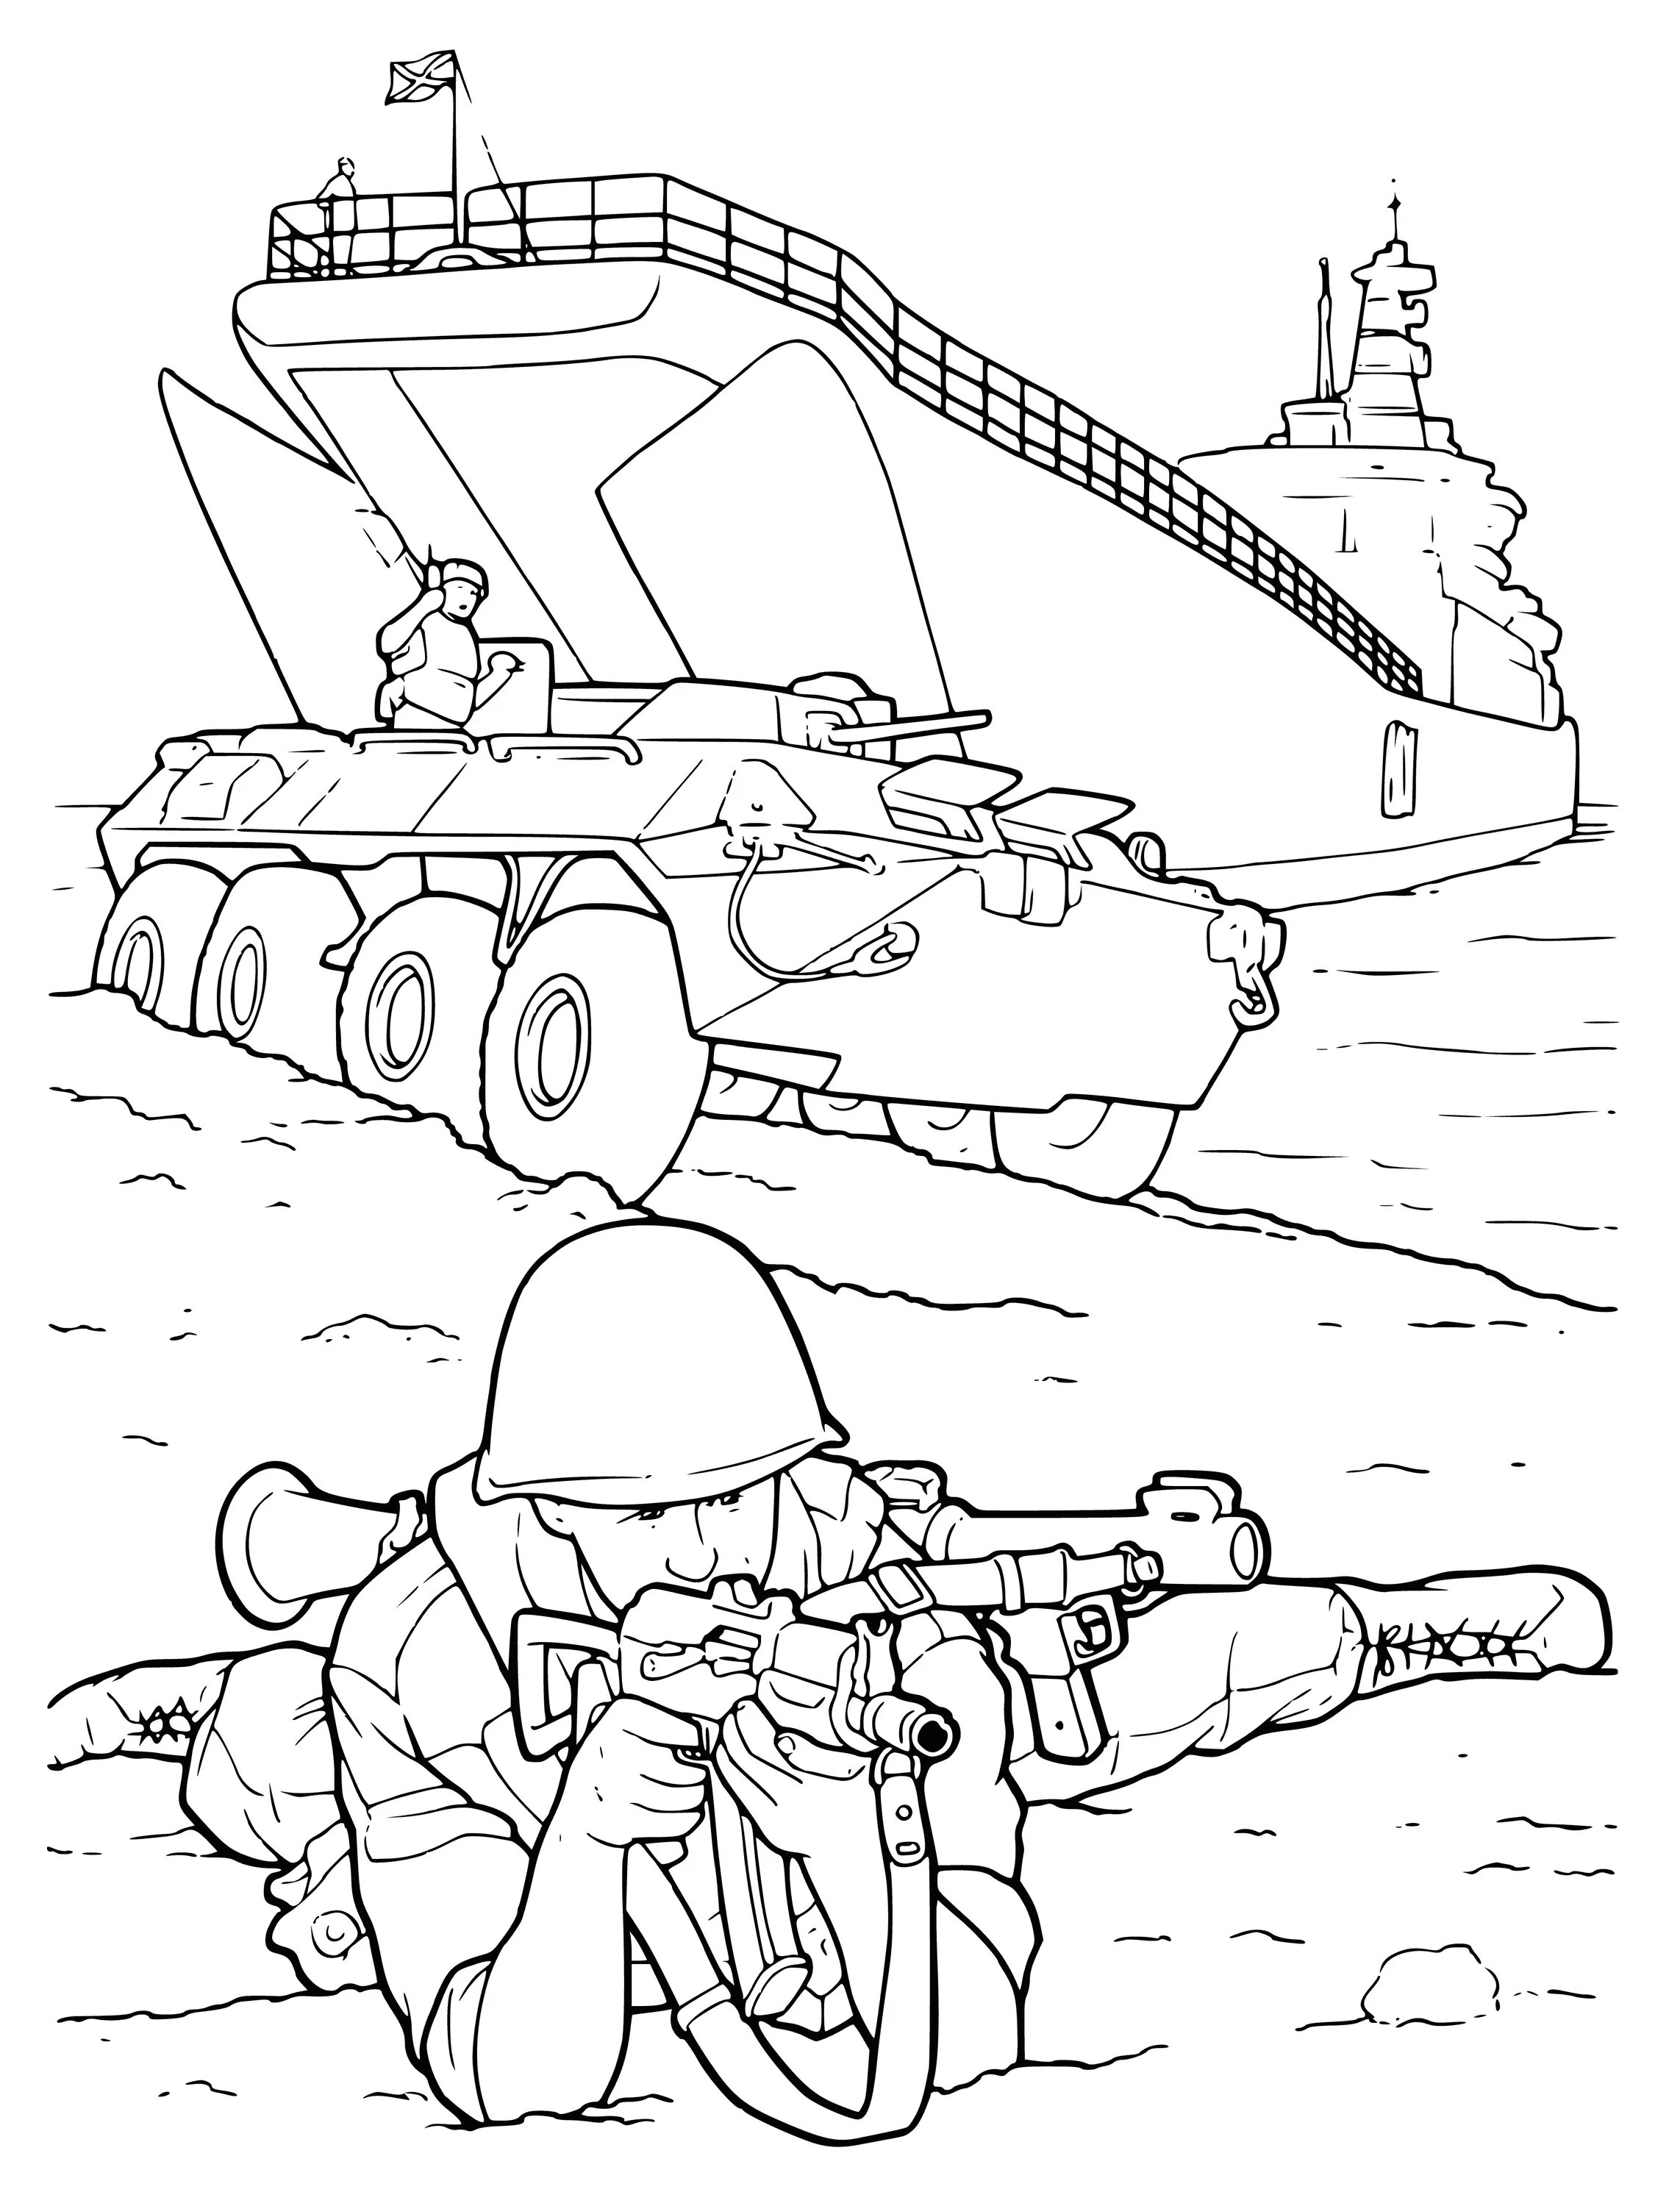 An extraordinary Russian soldier coloring pages for kids